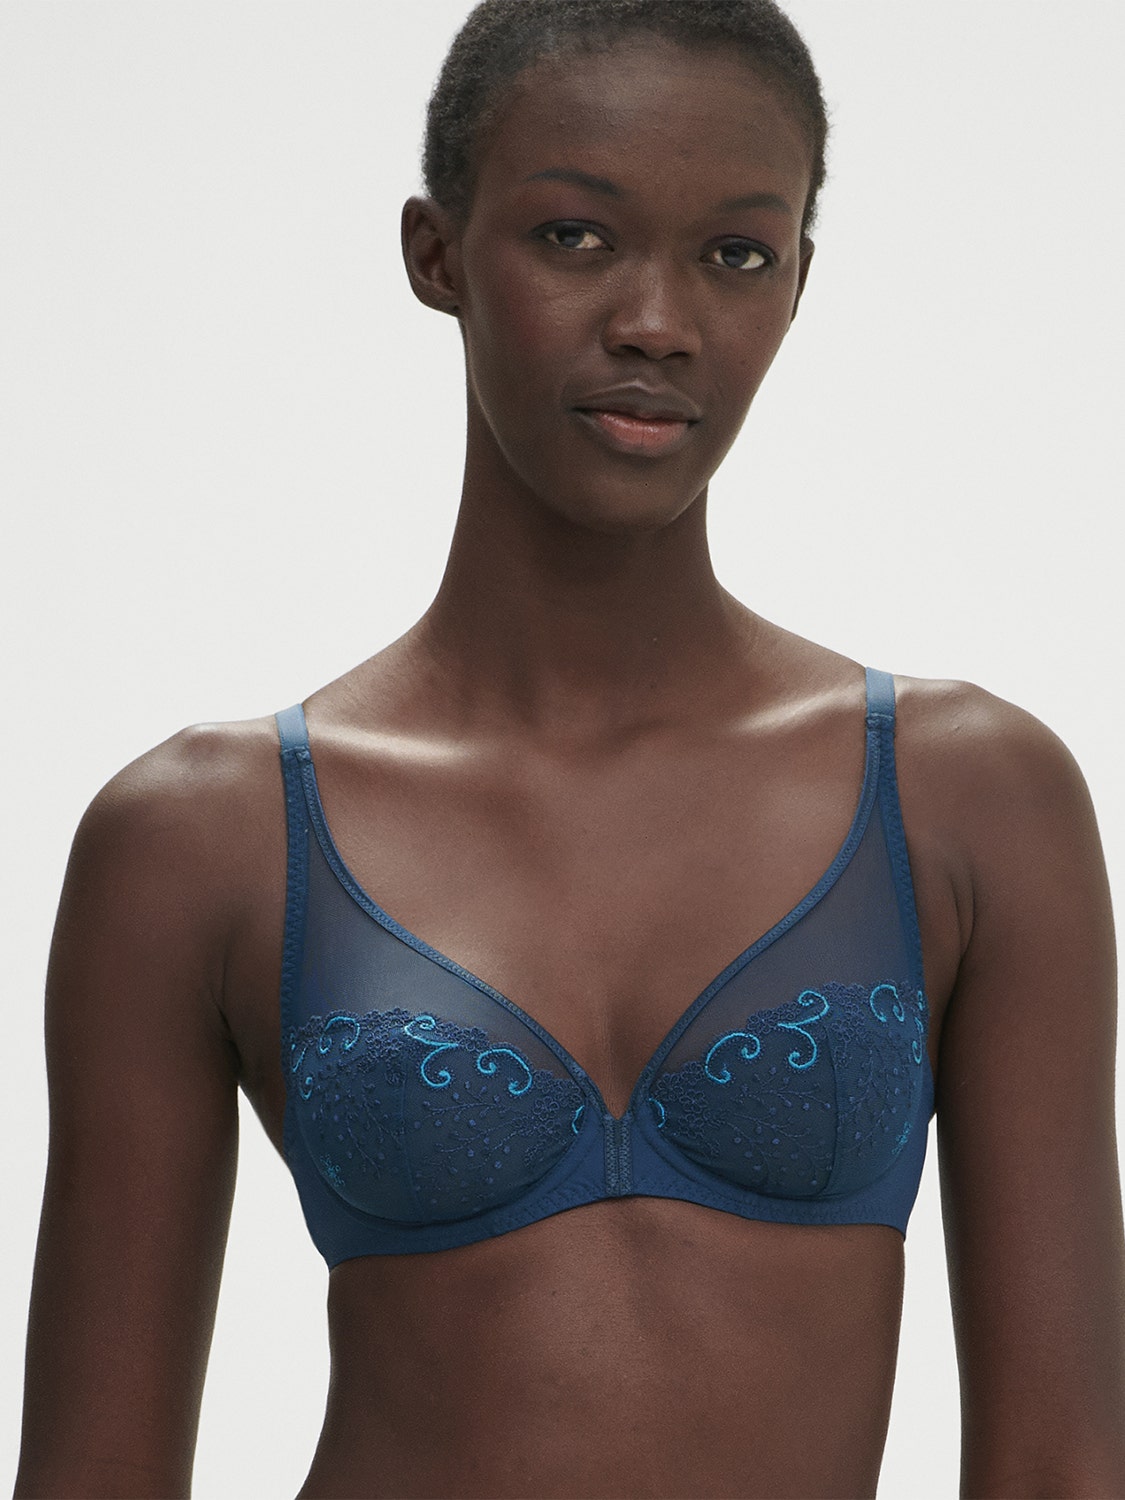 Simone Perele 12b Wish Fuller Half Cup Bra NATURAL buy for the best price  CAD$ 159.00 - Canada and U.S. delivery – Bralissimo